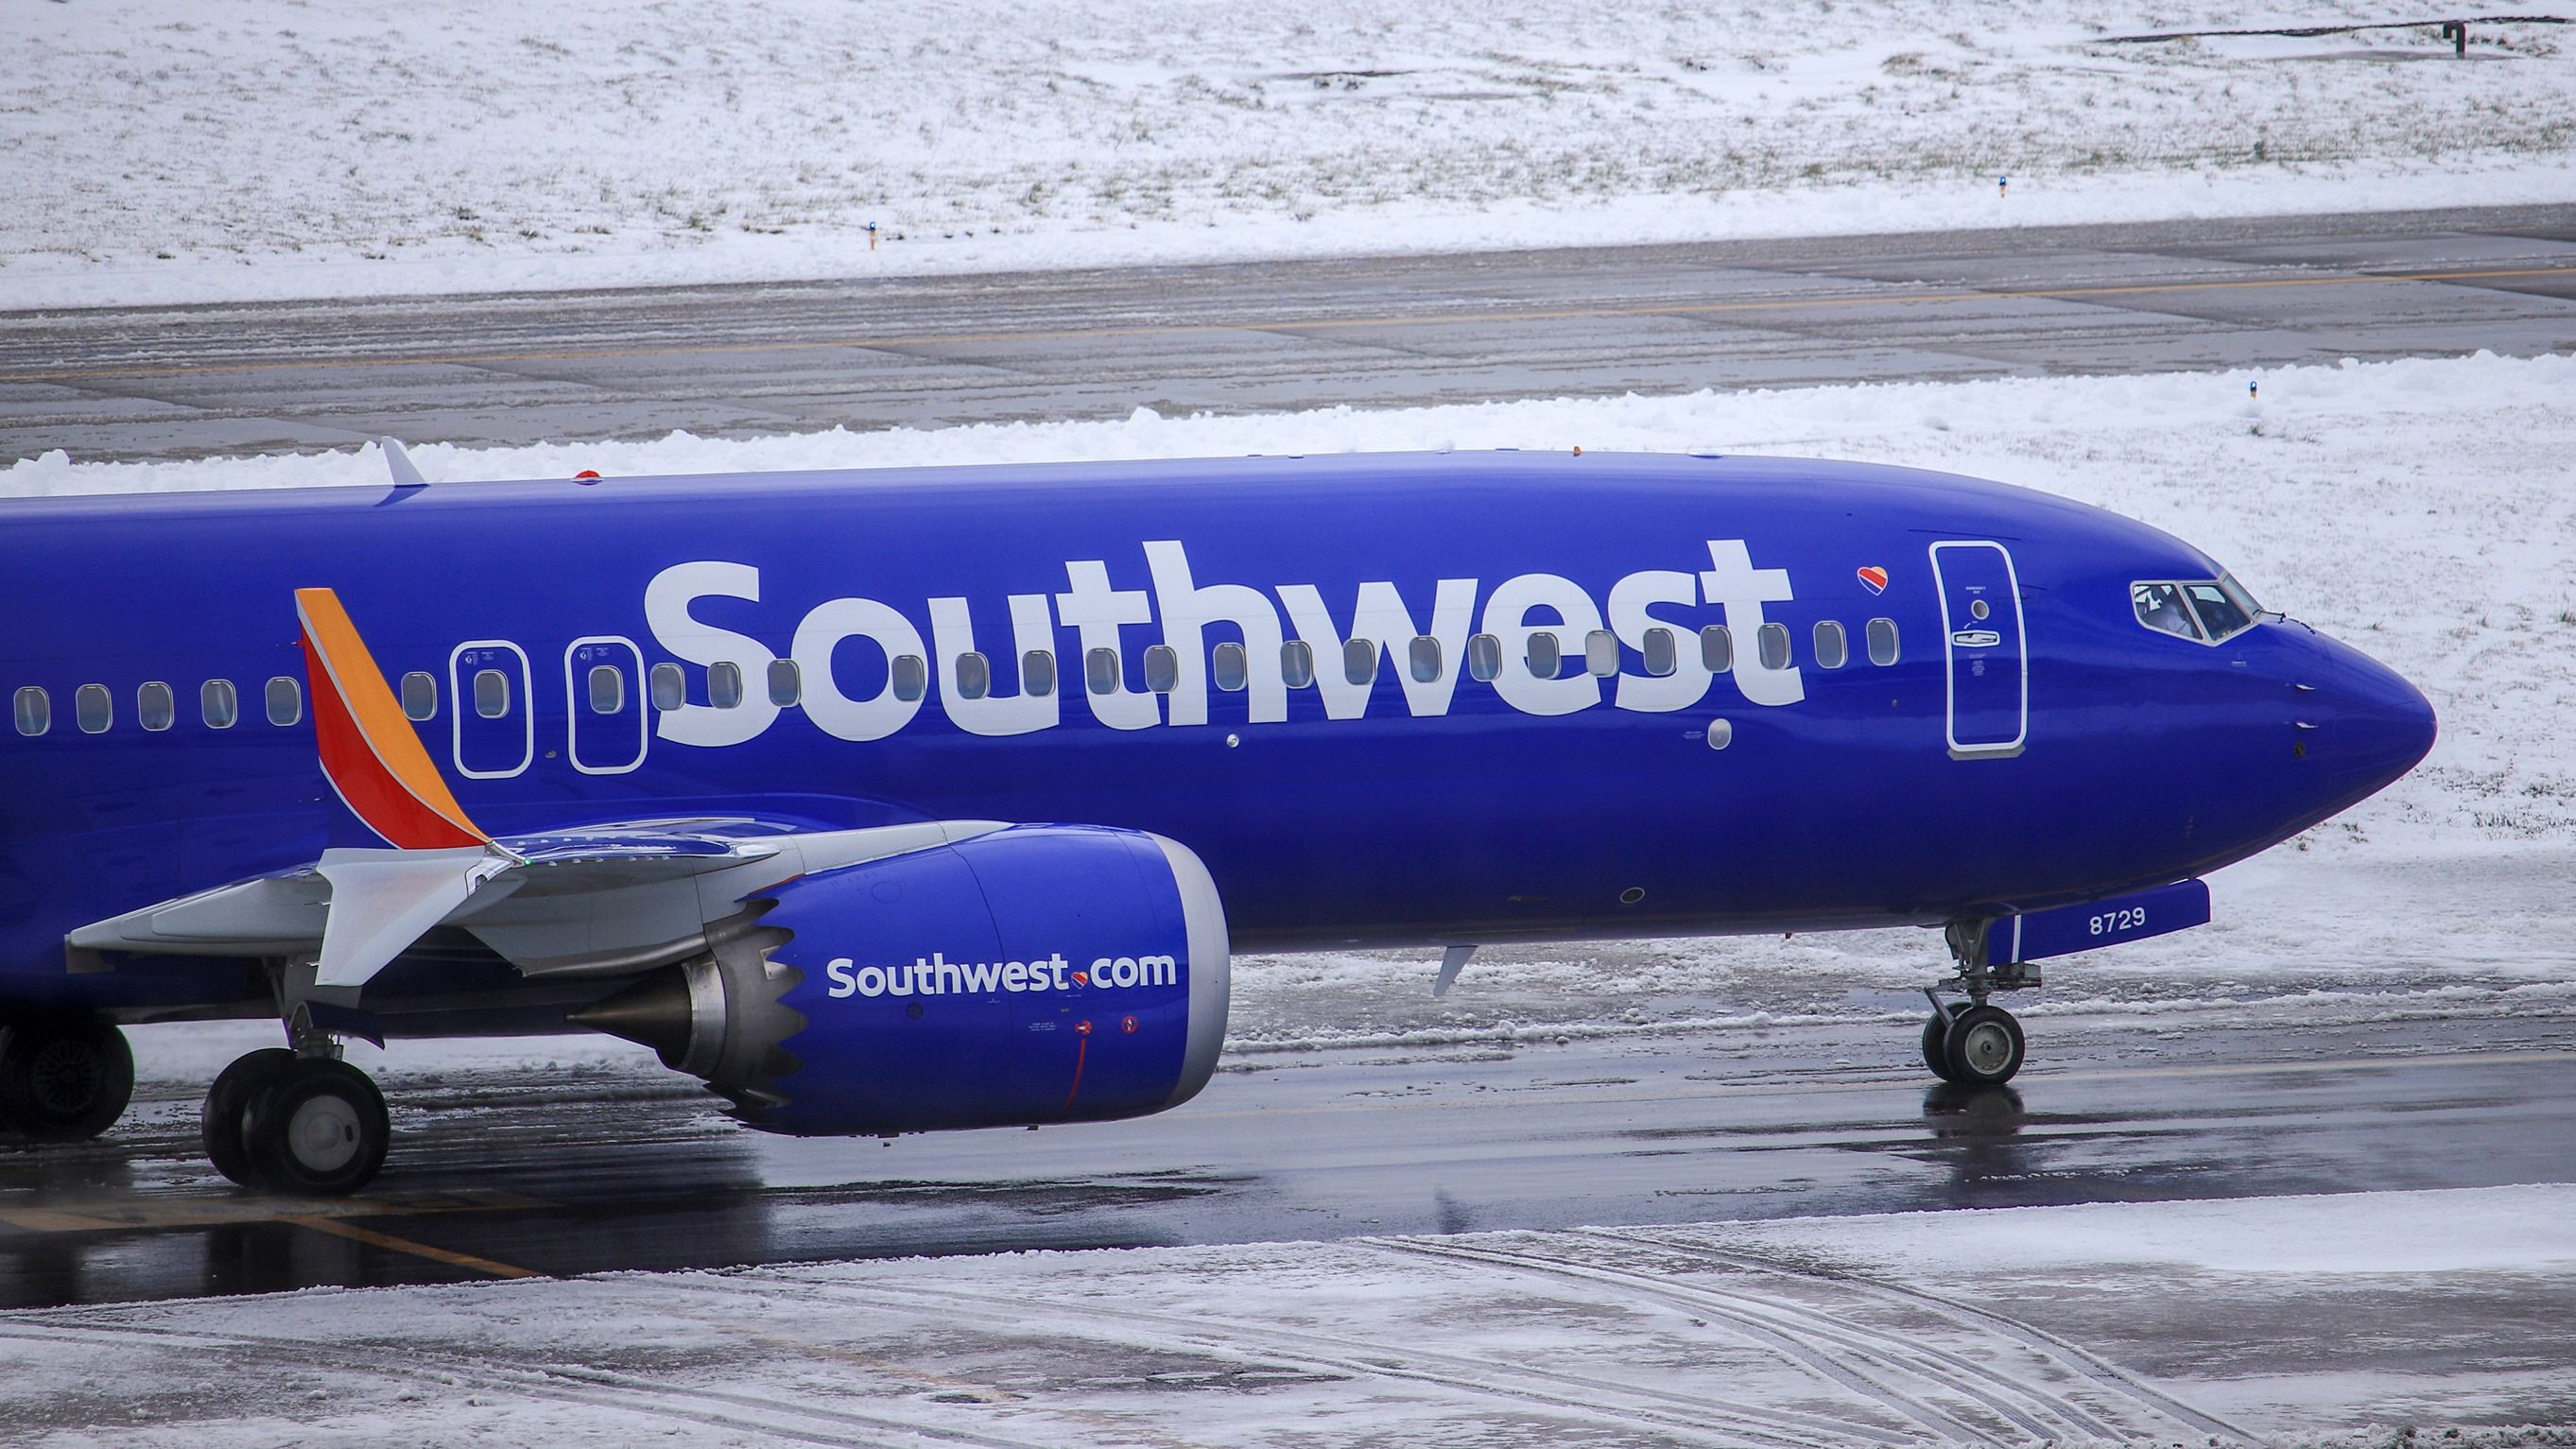 A Southwest Airlines Boeing 737 MAX 8 on a wet and snowy airport apron.